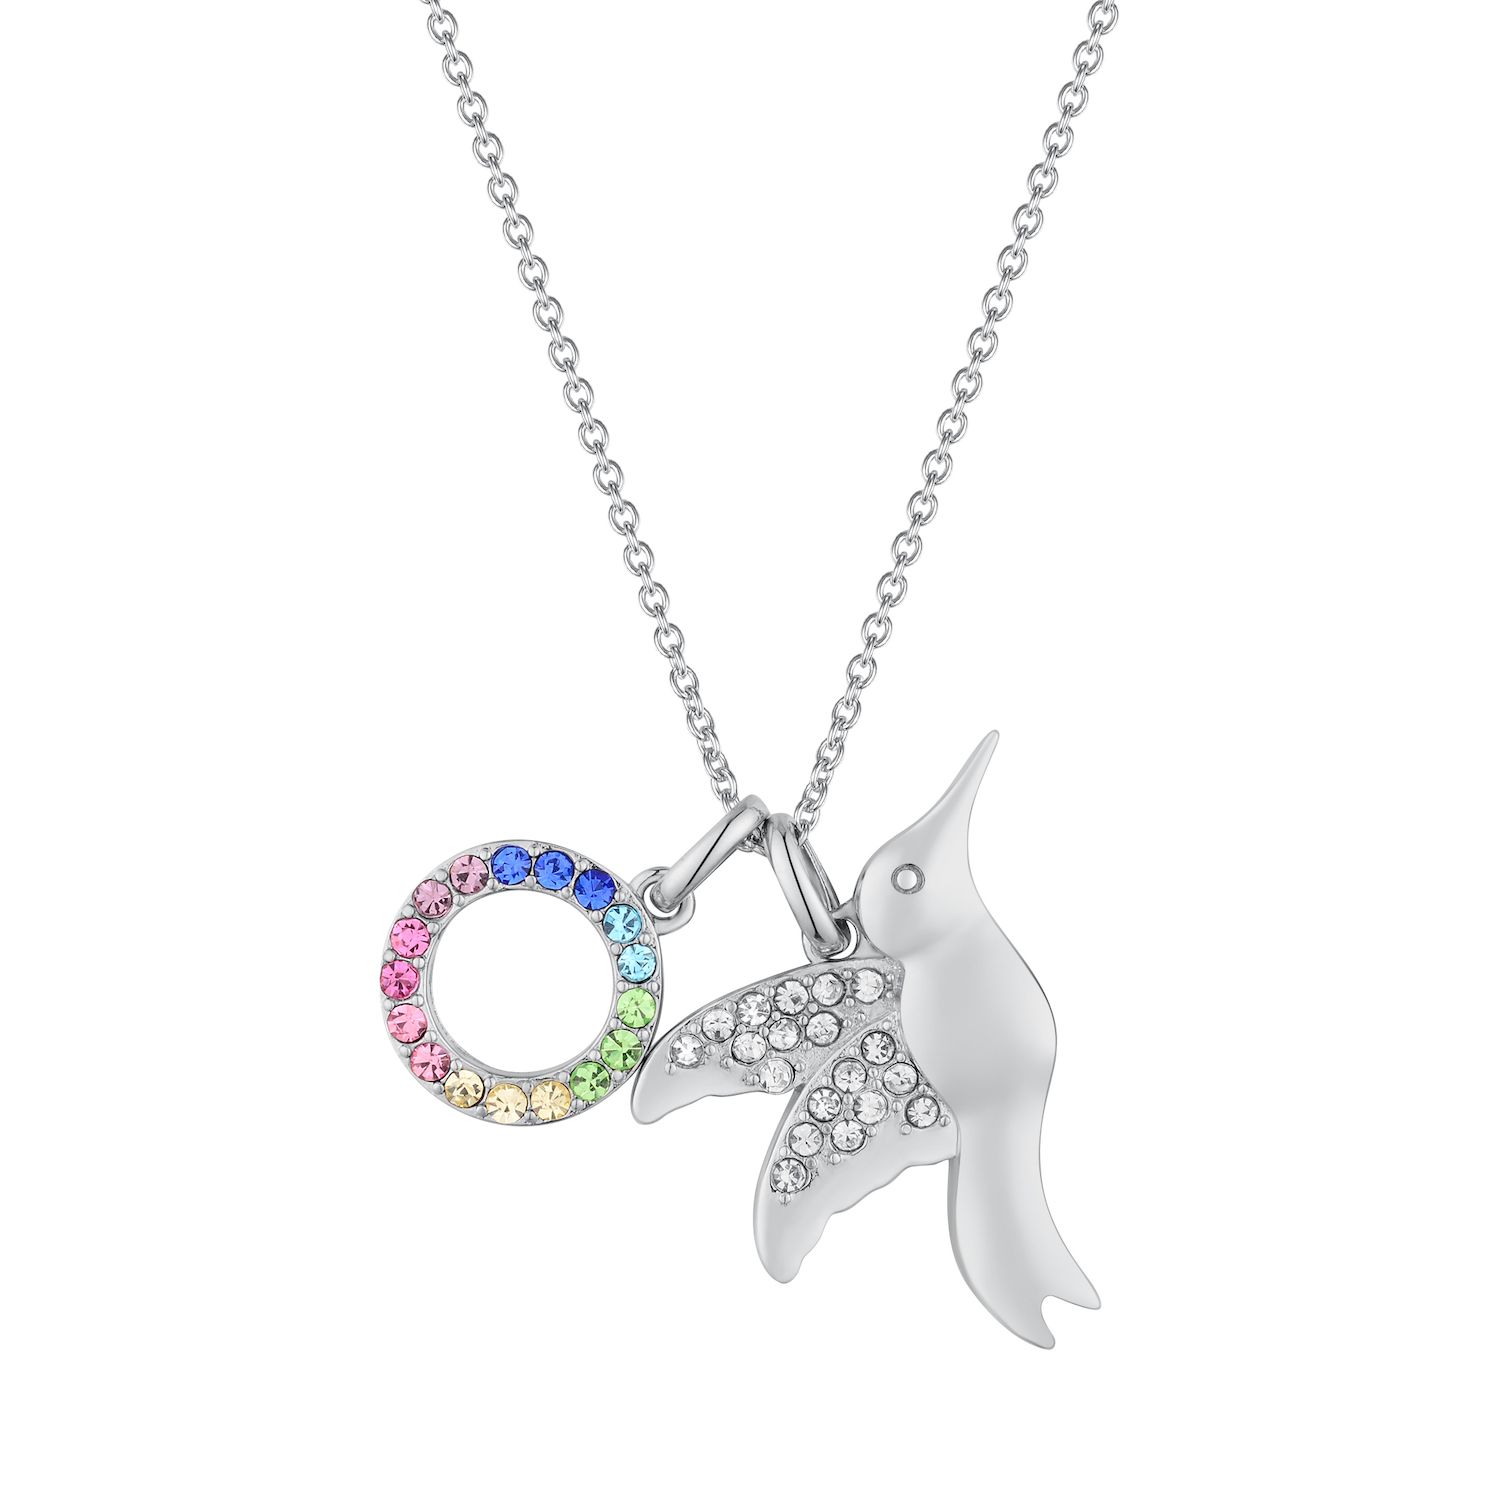 Crystal Collective Crystal Unicorn Pendant Necklace